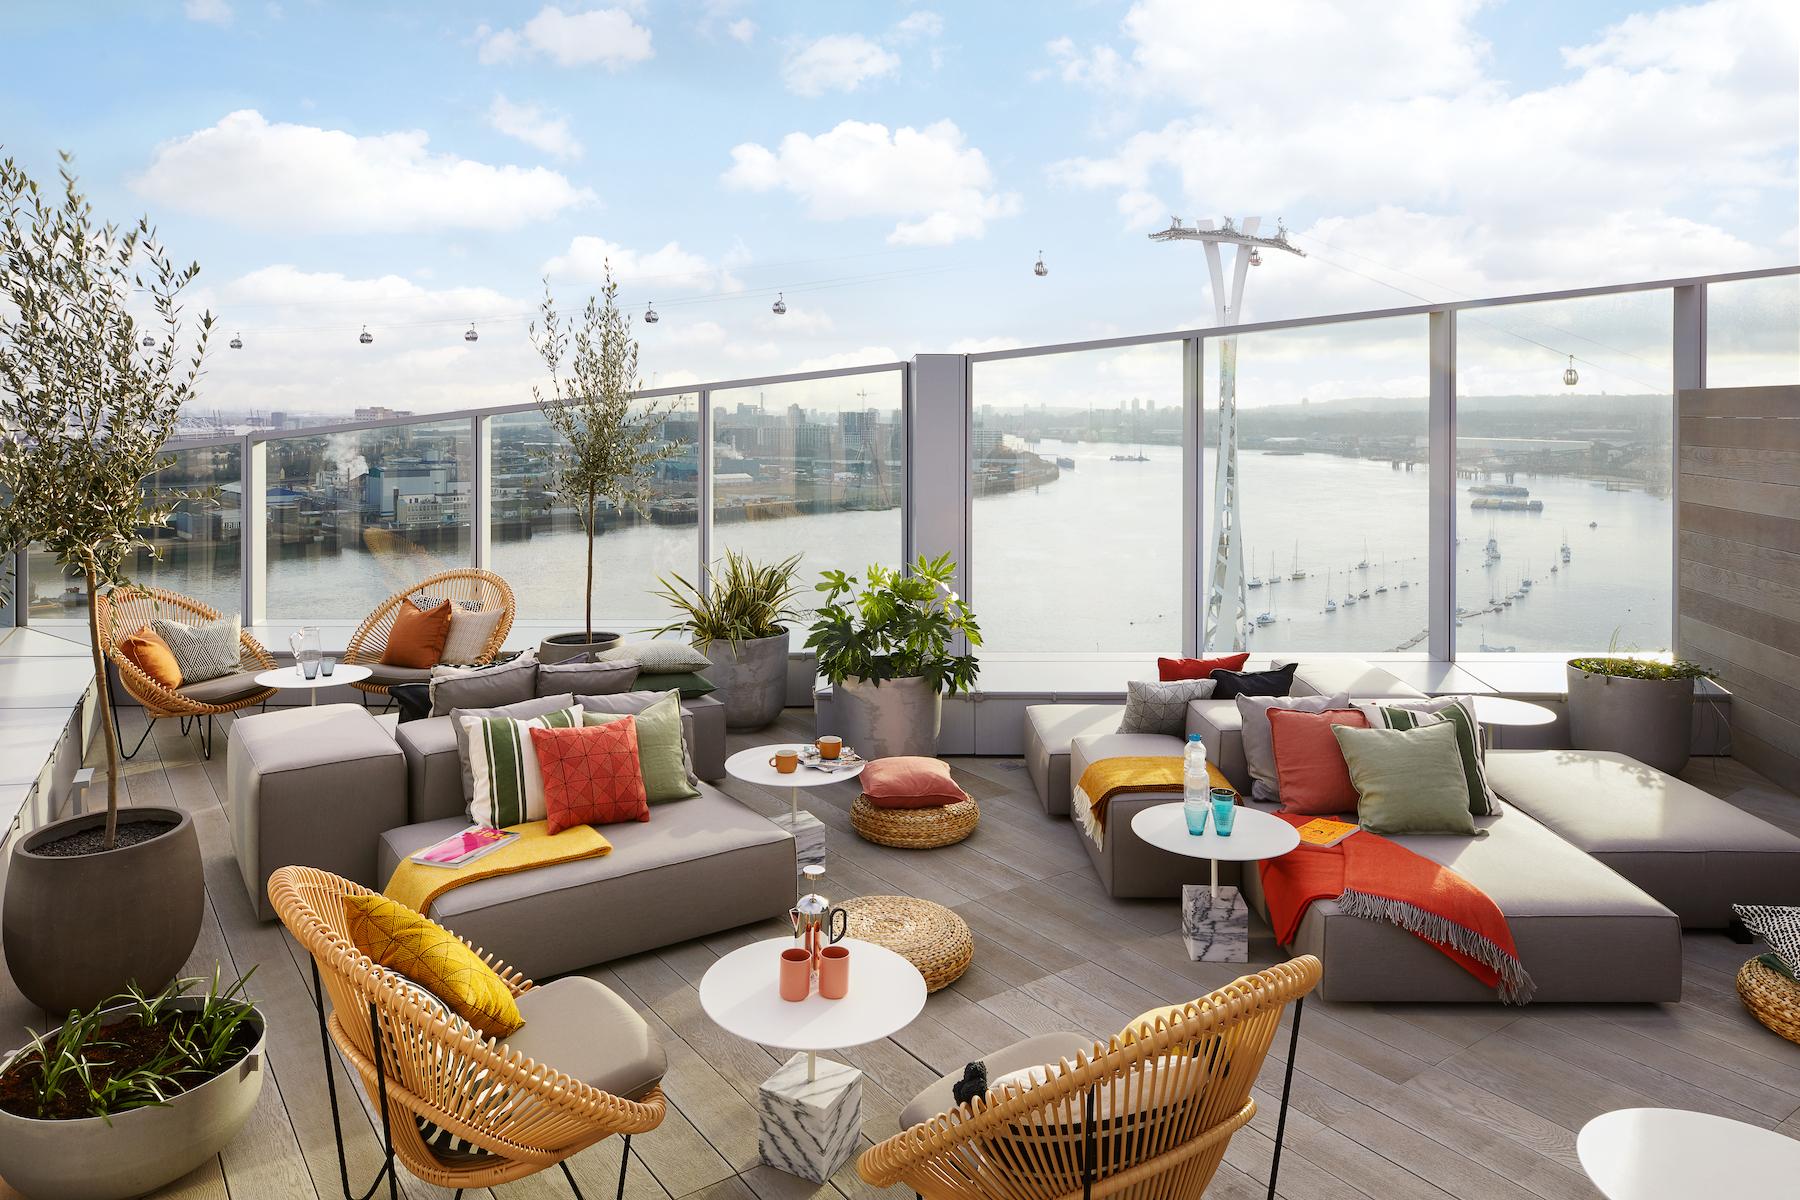 HJ Real Estate Guide: Greenwich Peninsula in the Heart of London